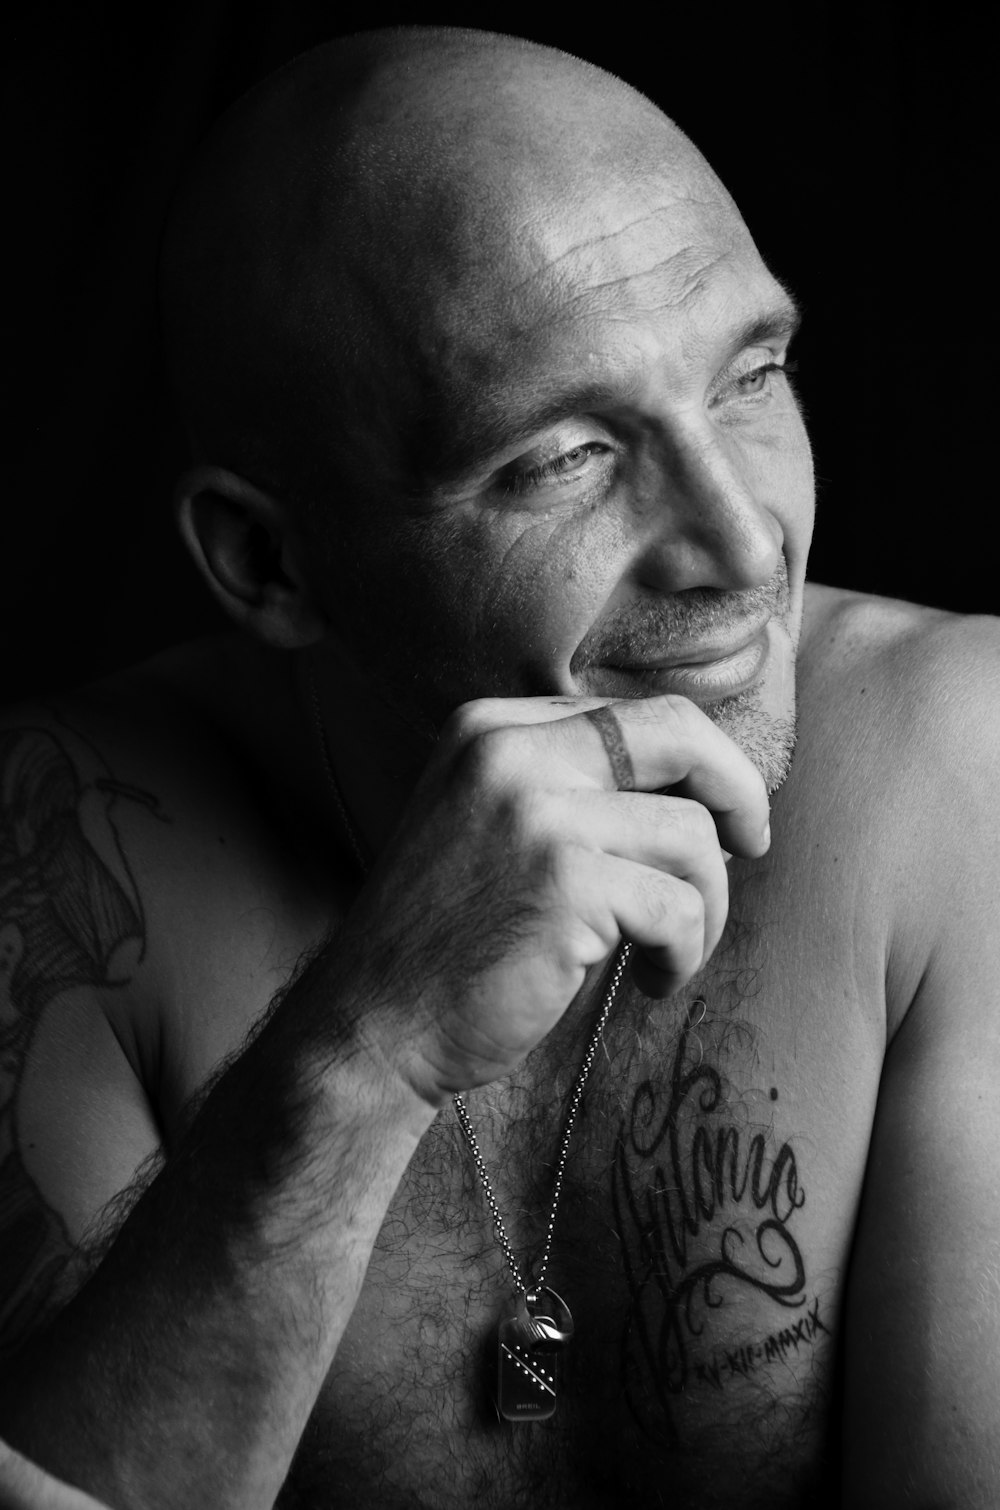 grayscale photo of man with tattoo on his right hand